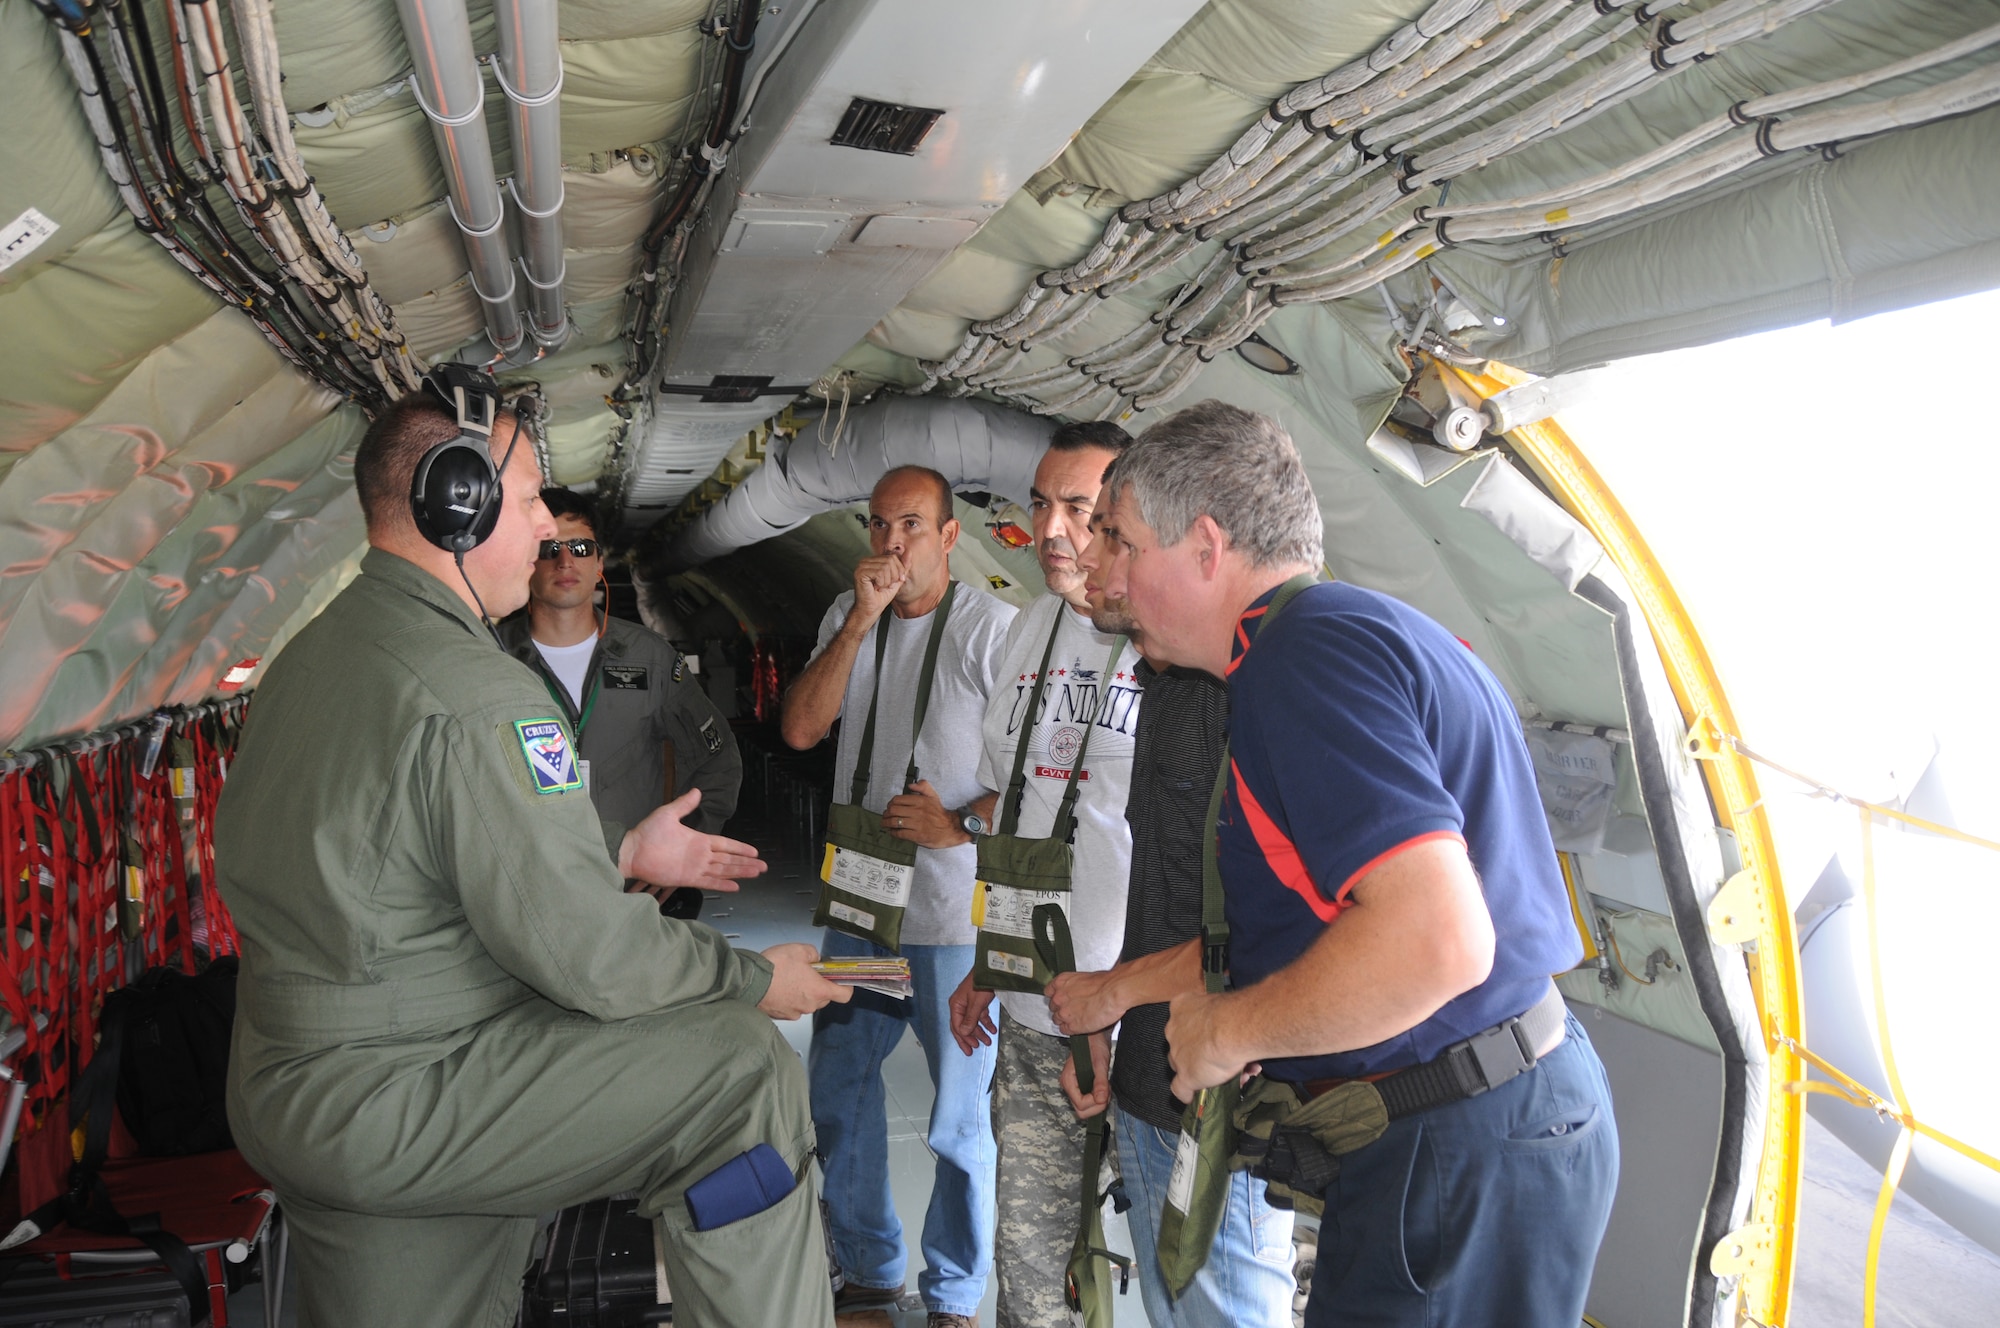 Master Sgt. Ken Daughenbaugh, a boom operator for the 161st Air Refueling Wing, Phoenix Ariz.,  conducts a safety briefing to a local media crew before a refueling mission on November 12, 2010. The 161st ARW is participating in CRUZEX V, or Cruzeiro Do Sul (Southern Cross).  CRUZEX  is a multi-national combined exercise involving the Air Forces of Argentina, Brazil, Chile, France and Uruguay, and observers from numerous other countries with more than 82 aircraft and almost 3,000 Airmen involved. U.S. Air Force Photo by Master Sgt. Kelly Deitloff